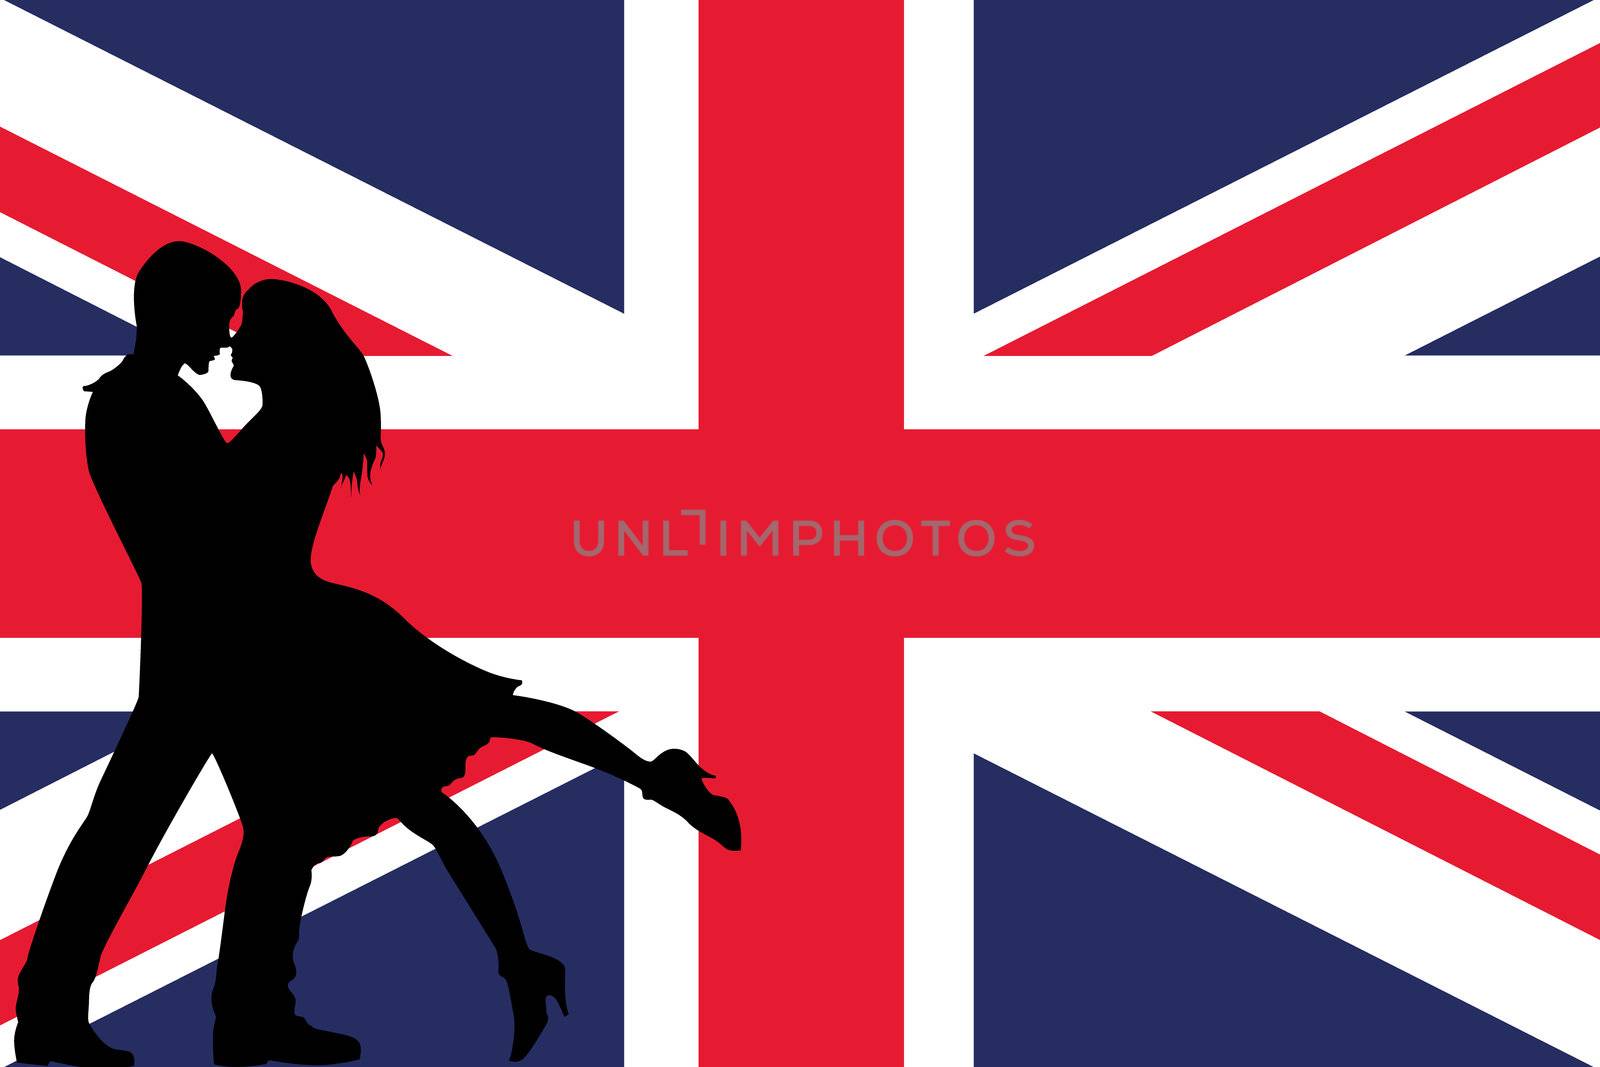 The flag of the United Kingdom with the silhouettes of romantic lovers